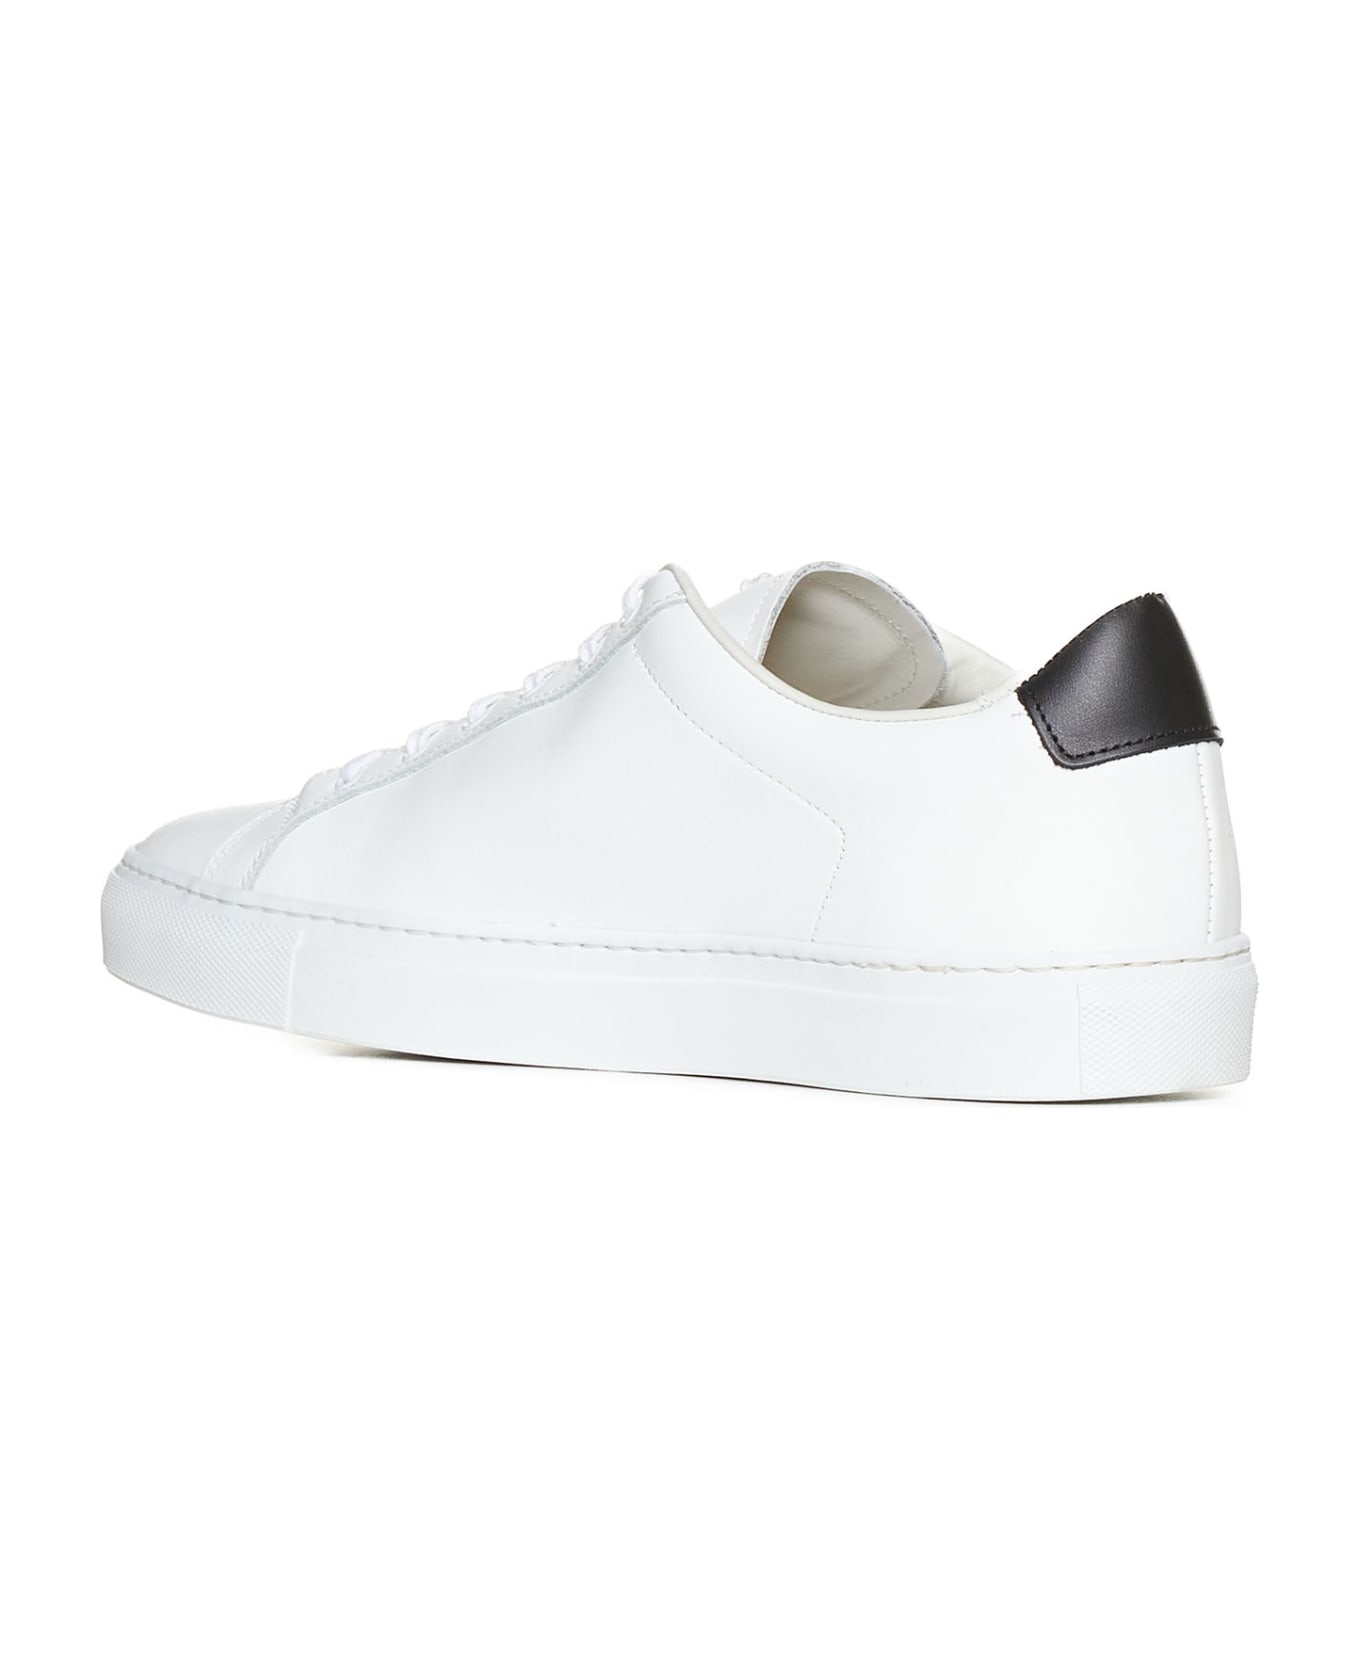 Common Projects White Leather Sneakers - White スニーカー